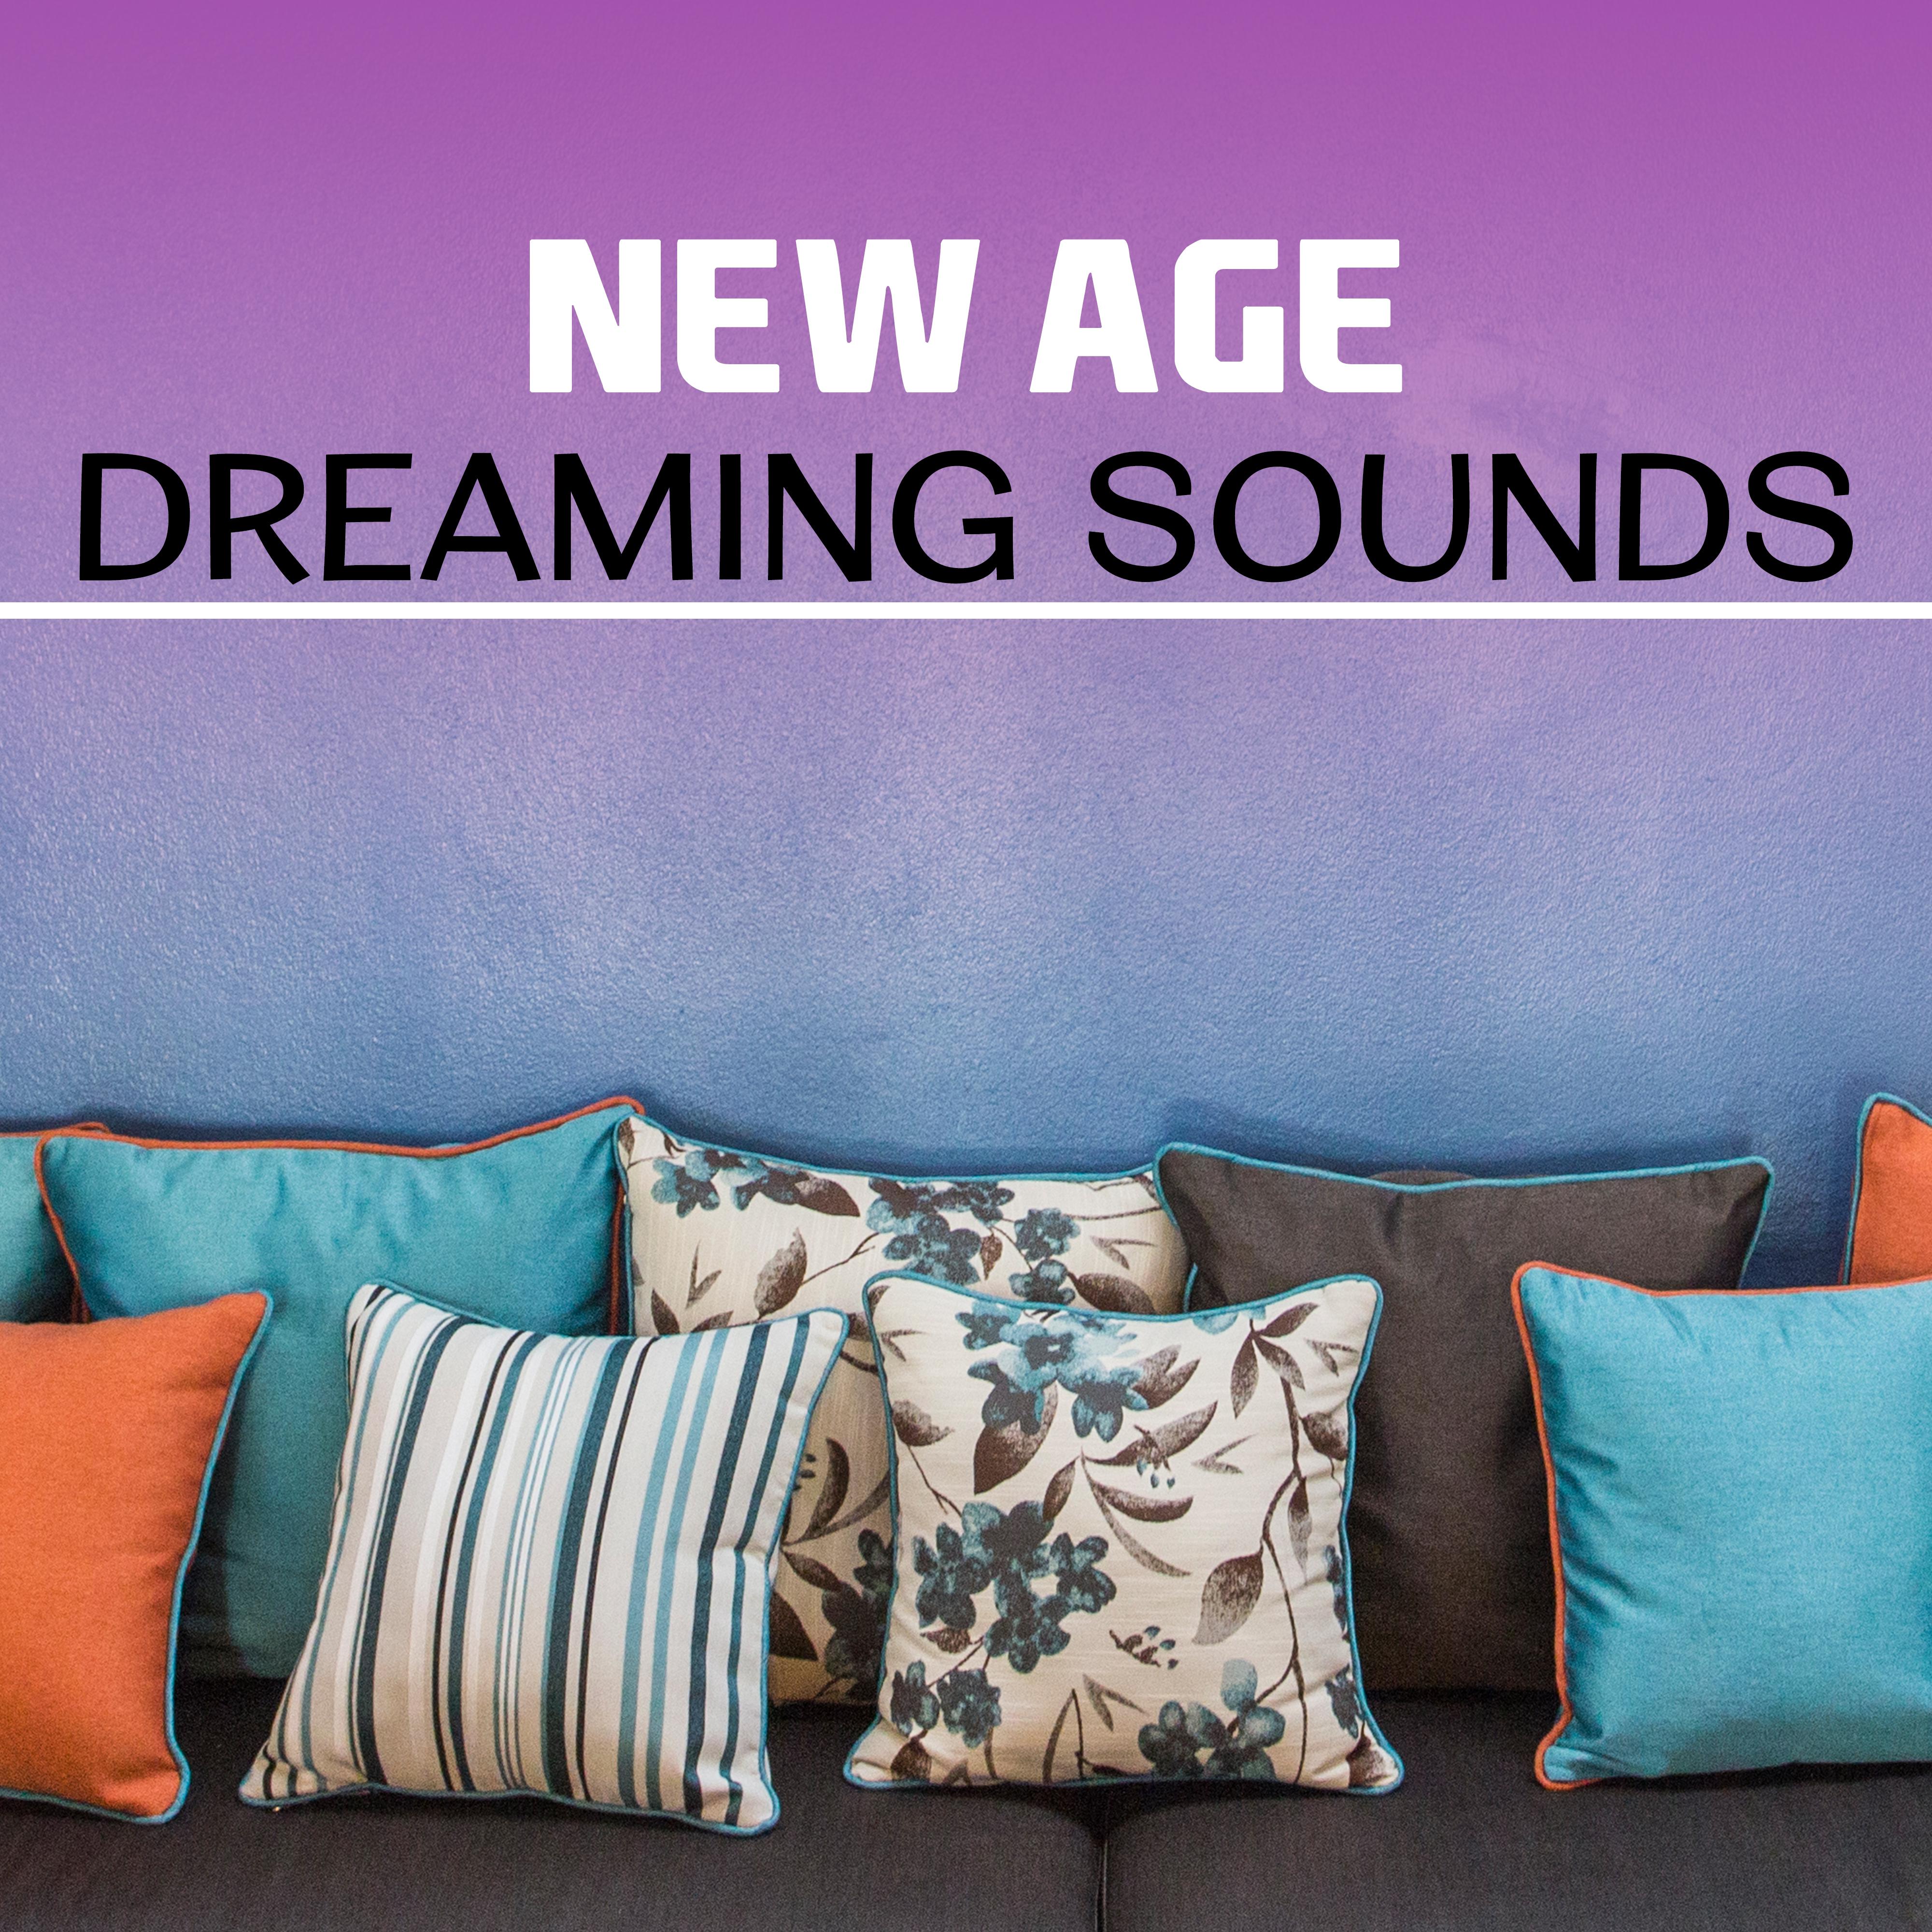 New Age Dreaming Sounds – Calming Waves, Stress Relief, Peaceful Music, Chilled Sounds, Night Rest